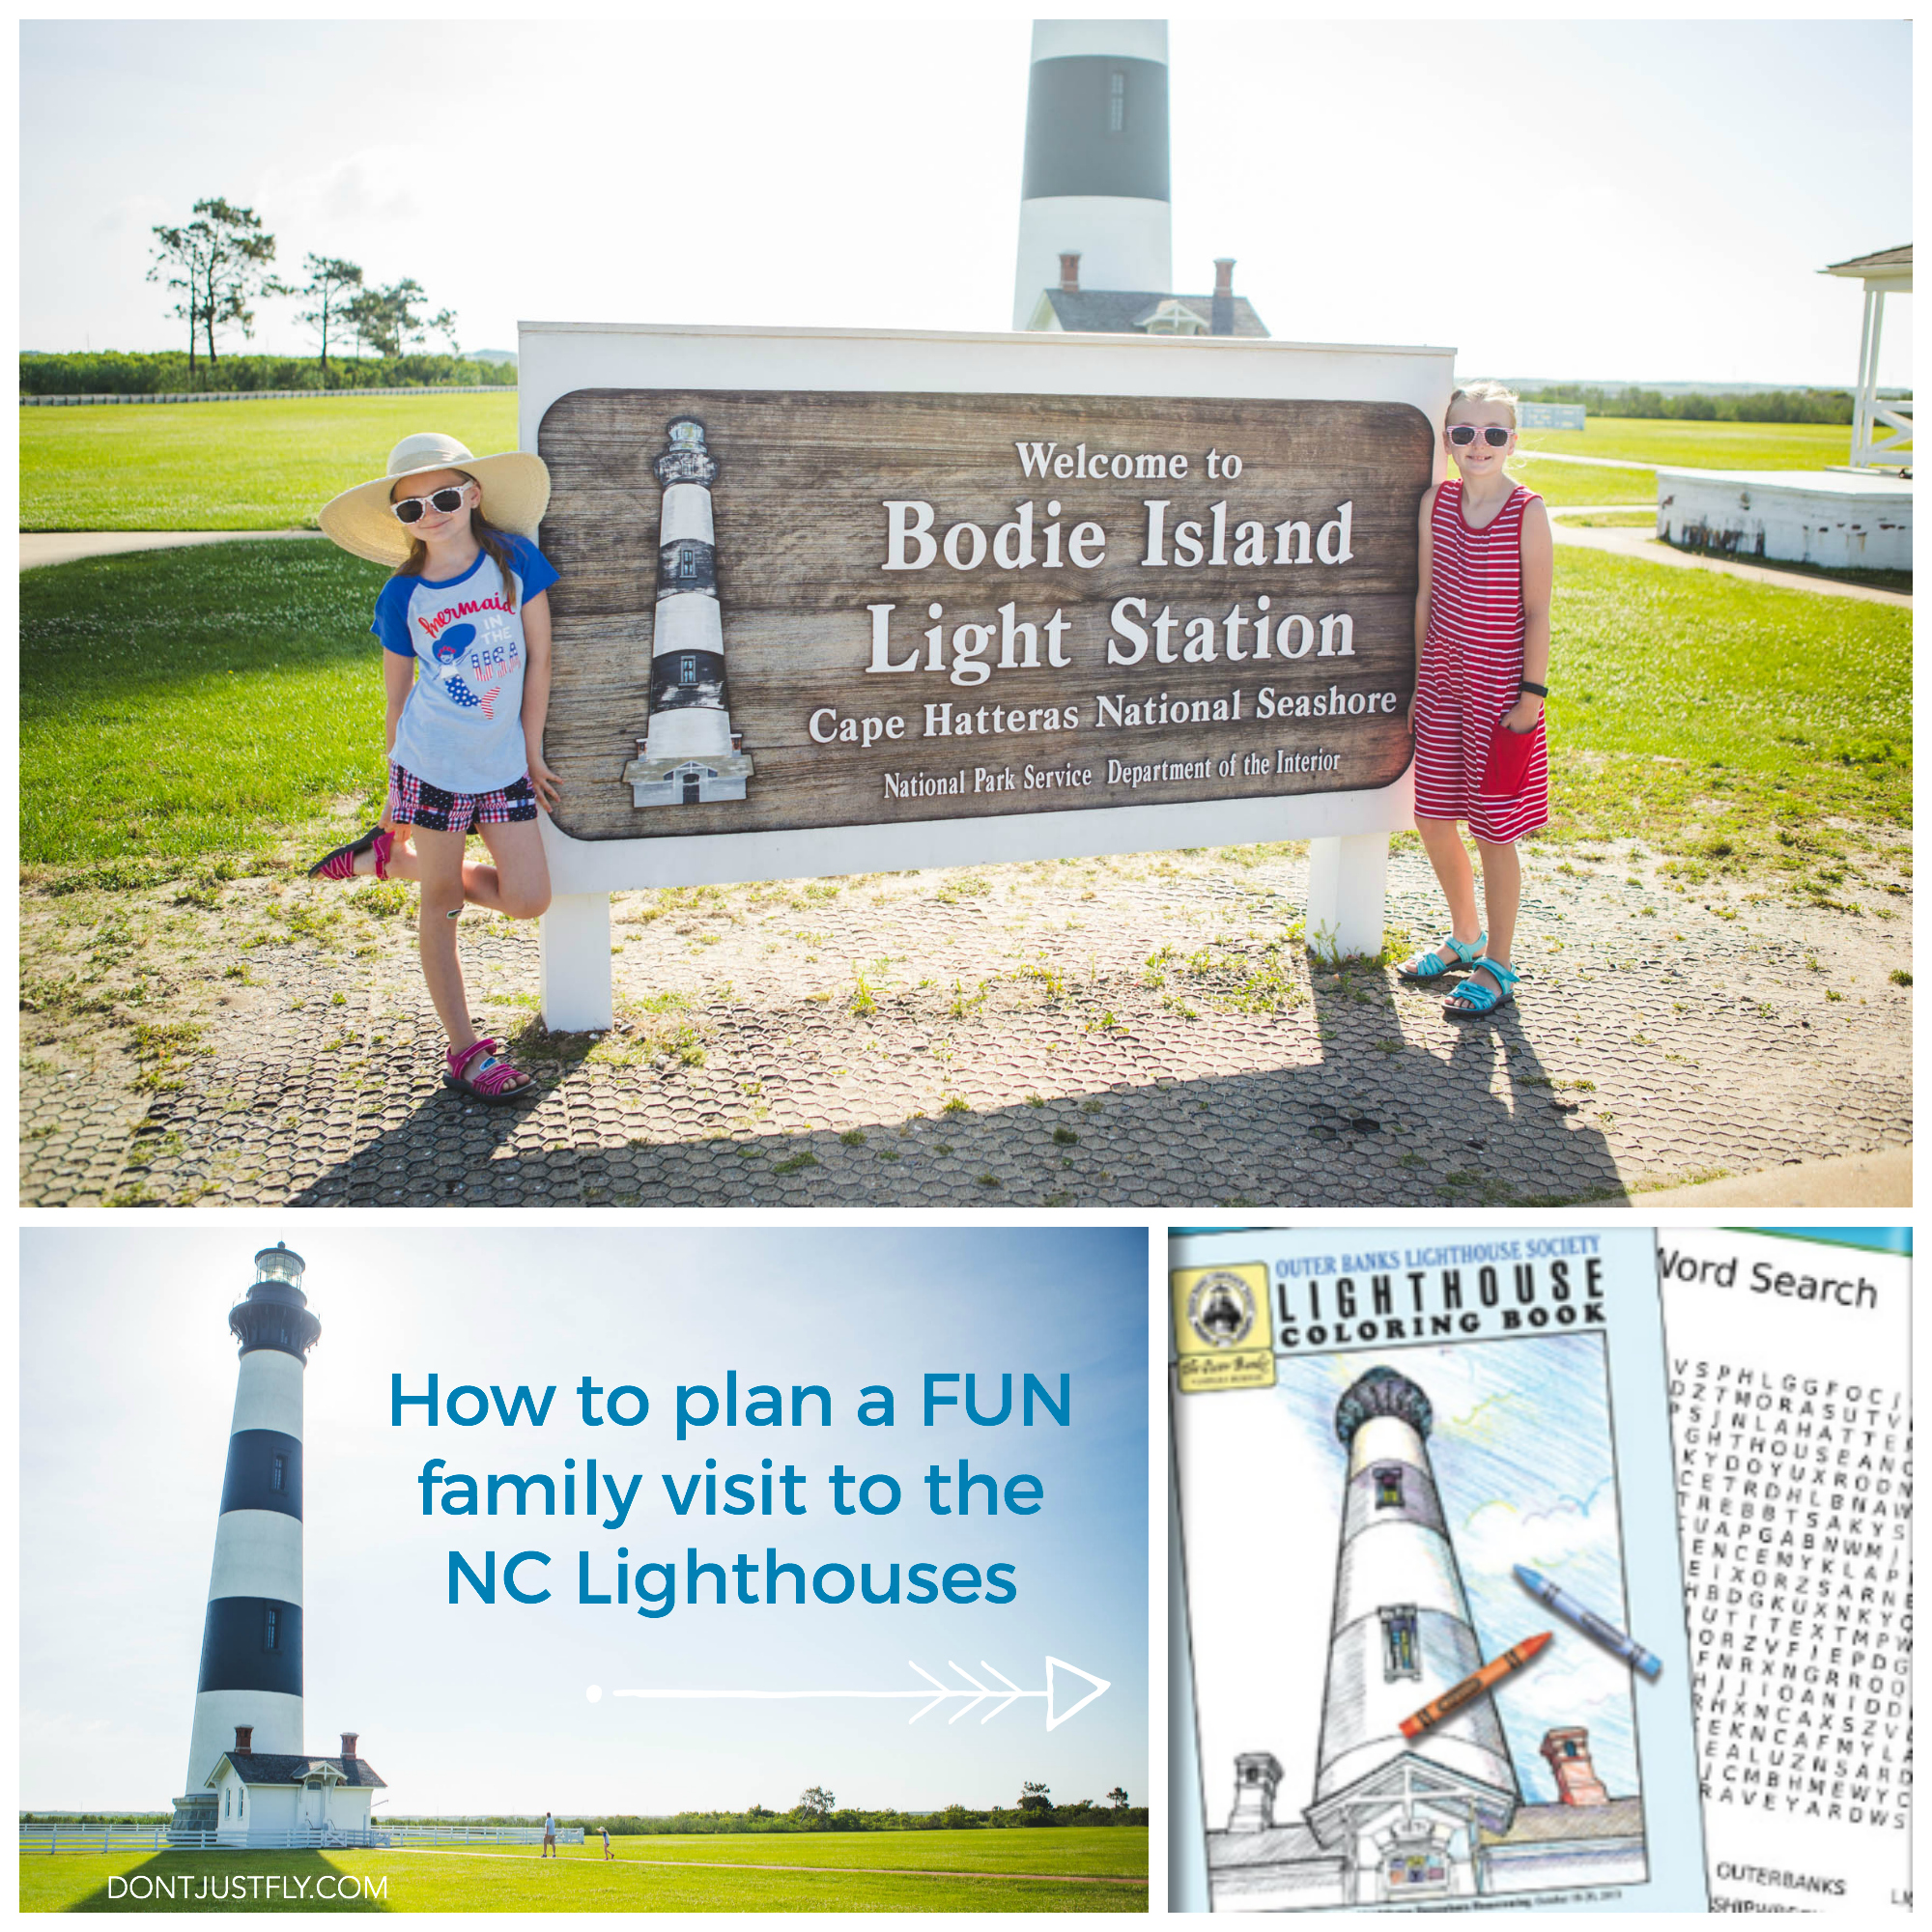 How to plan a FUN family visit to the NC lighthouses